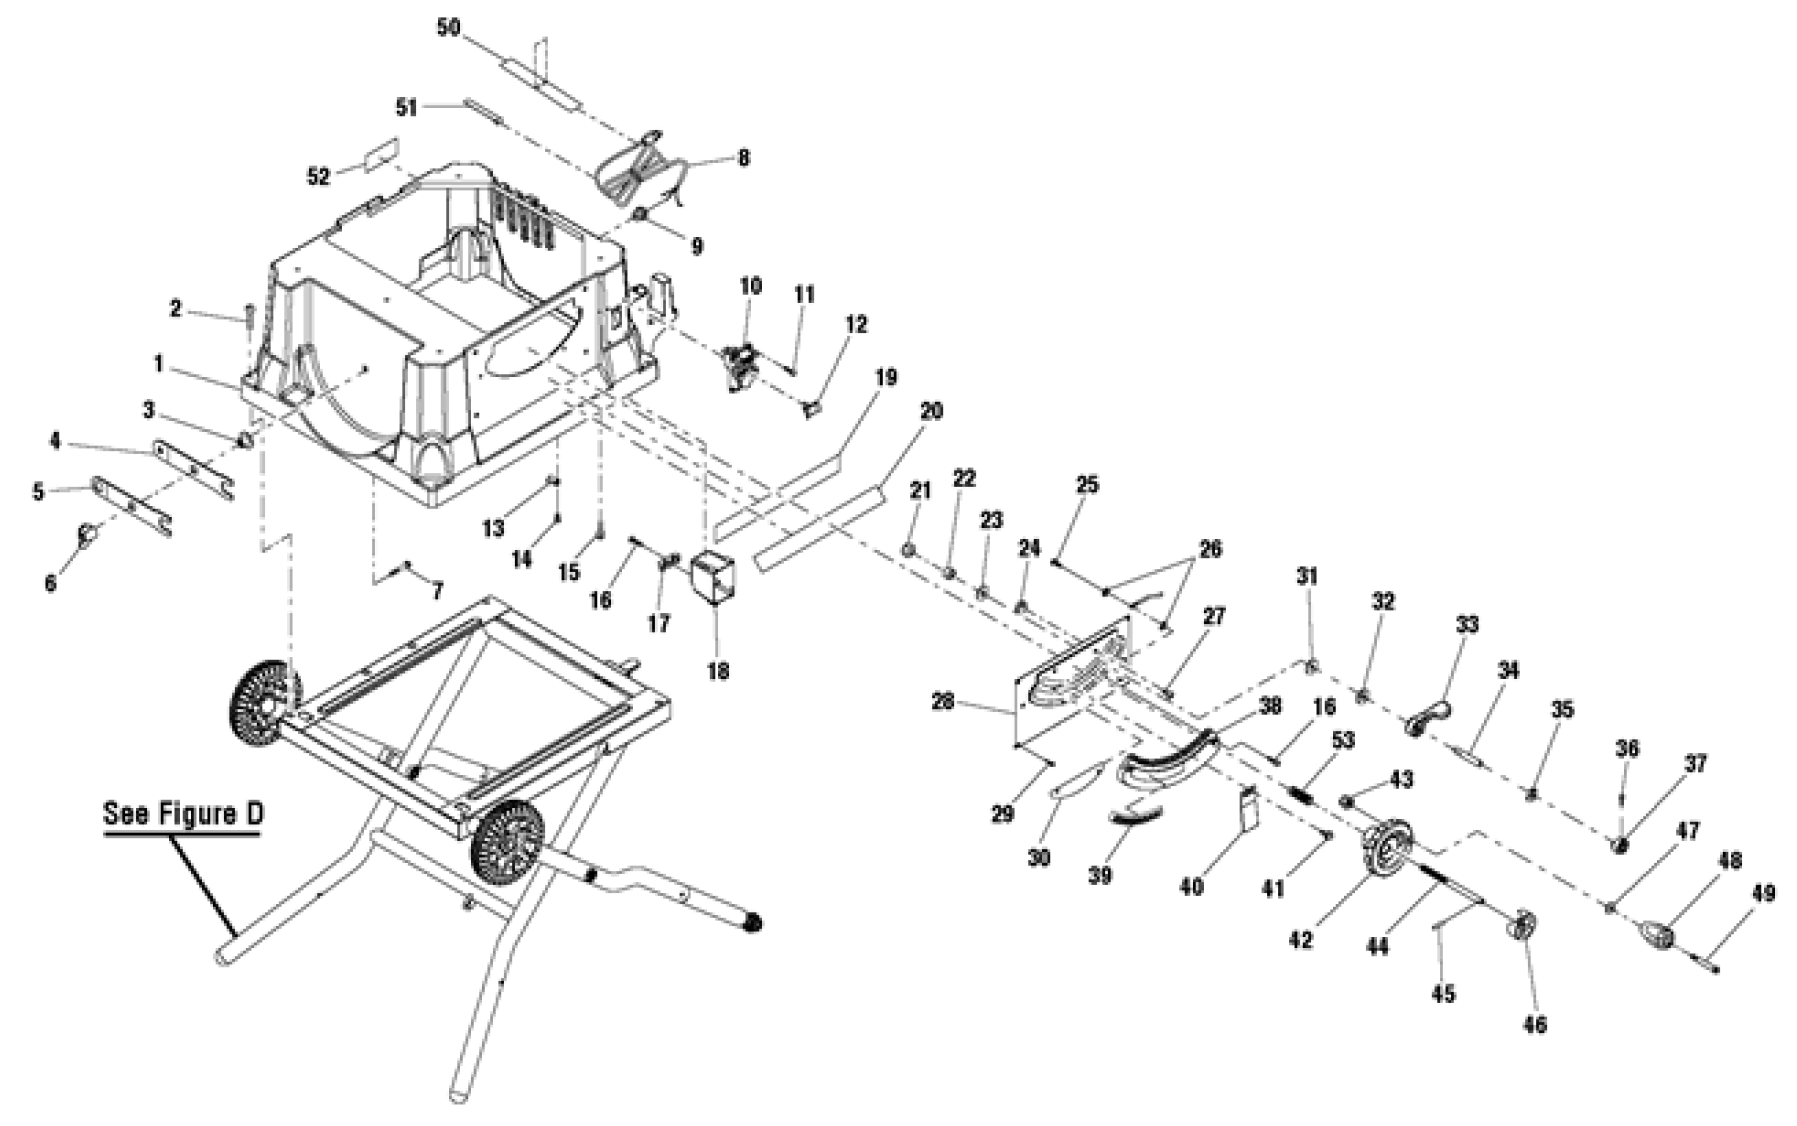 Kalkun Mælkehvid Akkumulering Ryobi Rts31 10" Table Saw With Wheeled Stand | Model Schematic Parts  Diagram — Toolbarn.com